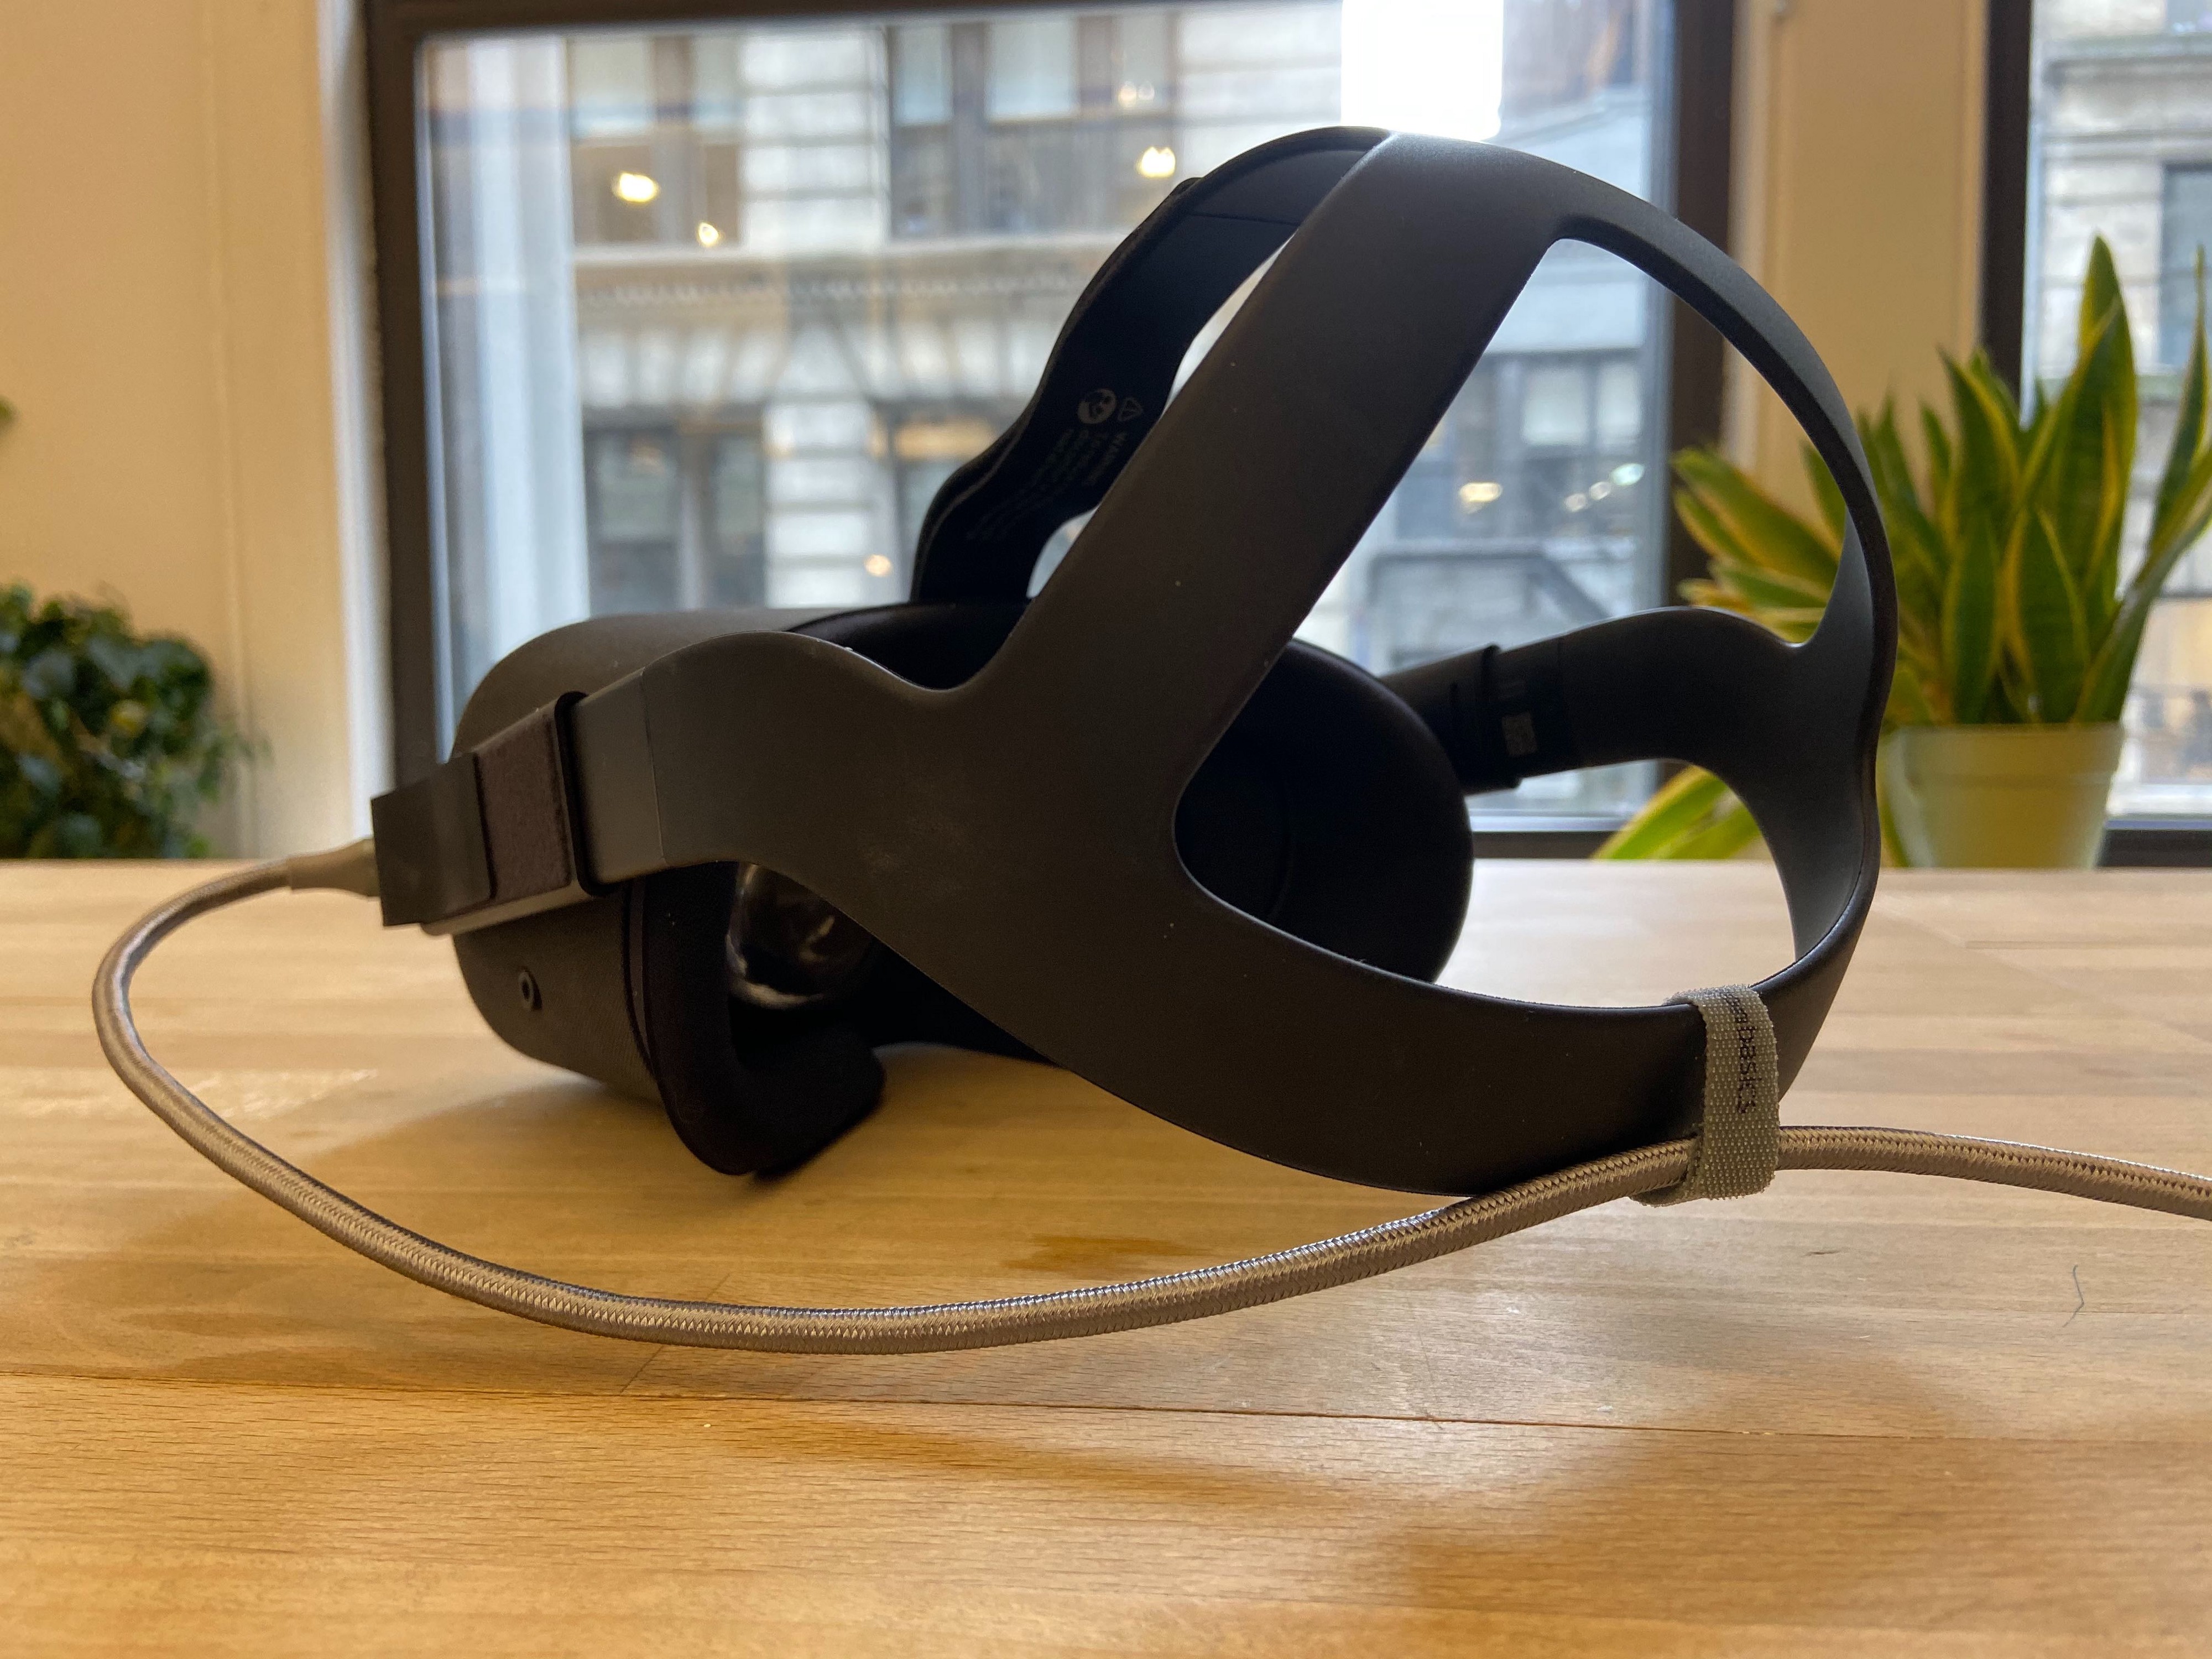 perspektiv Lignende studieafgift Everything You Need to Know About the Oculus Link Beta